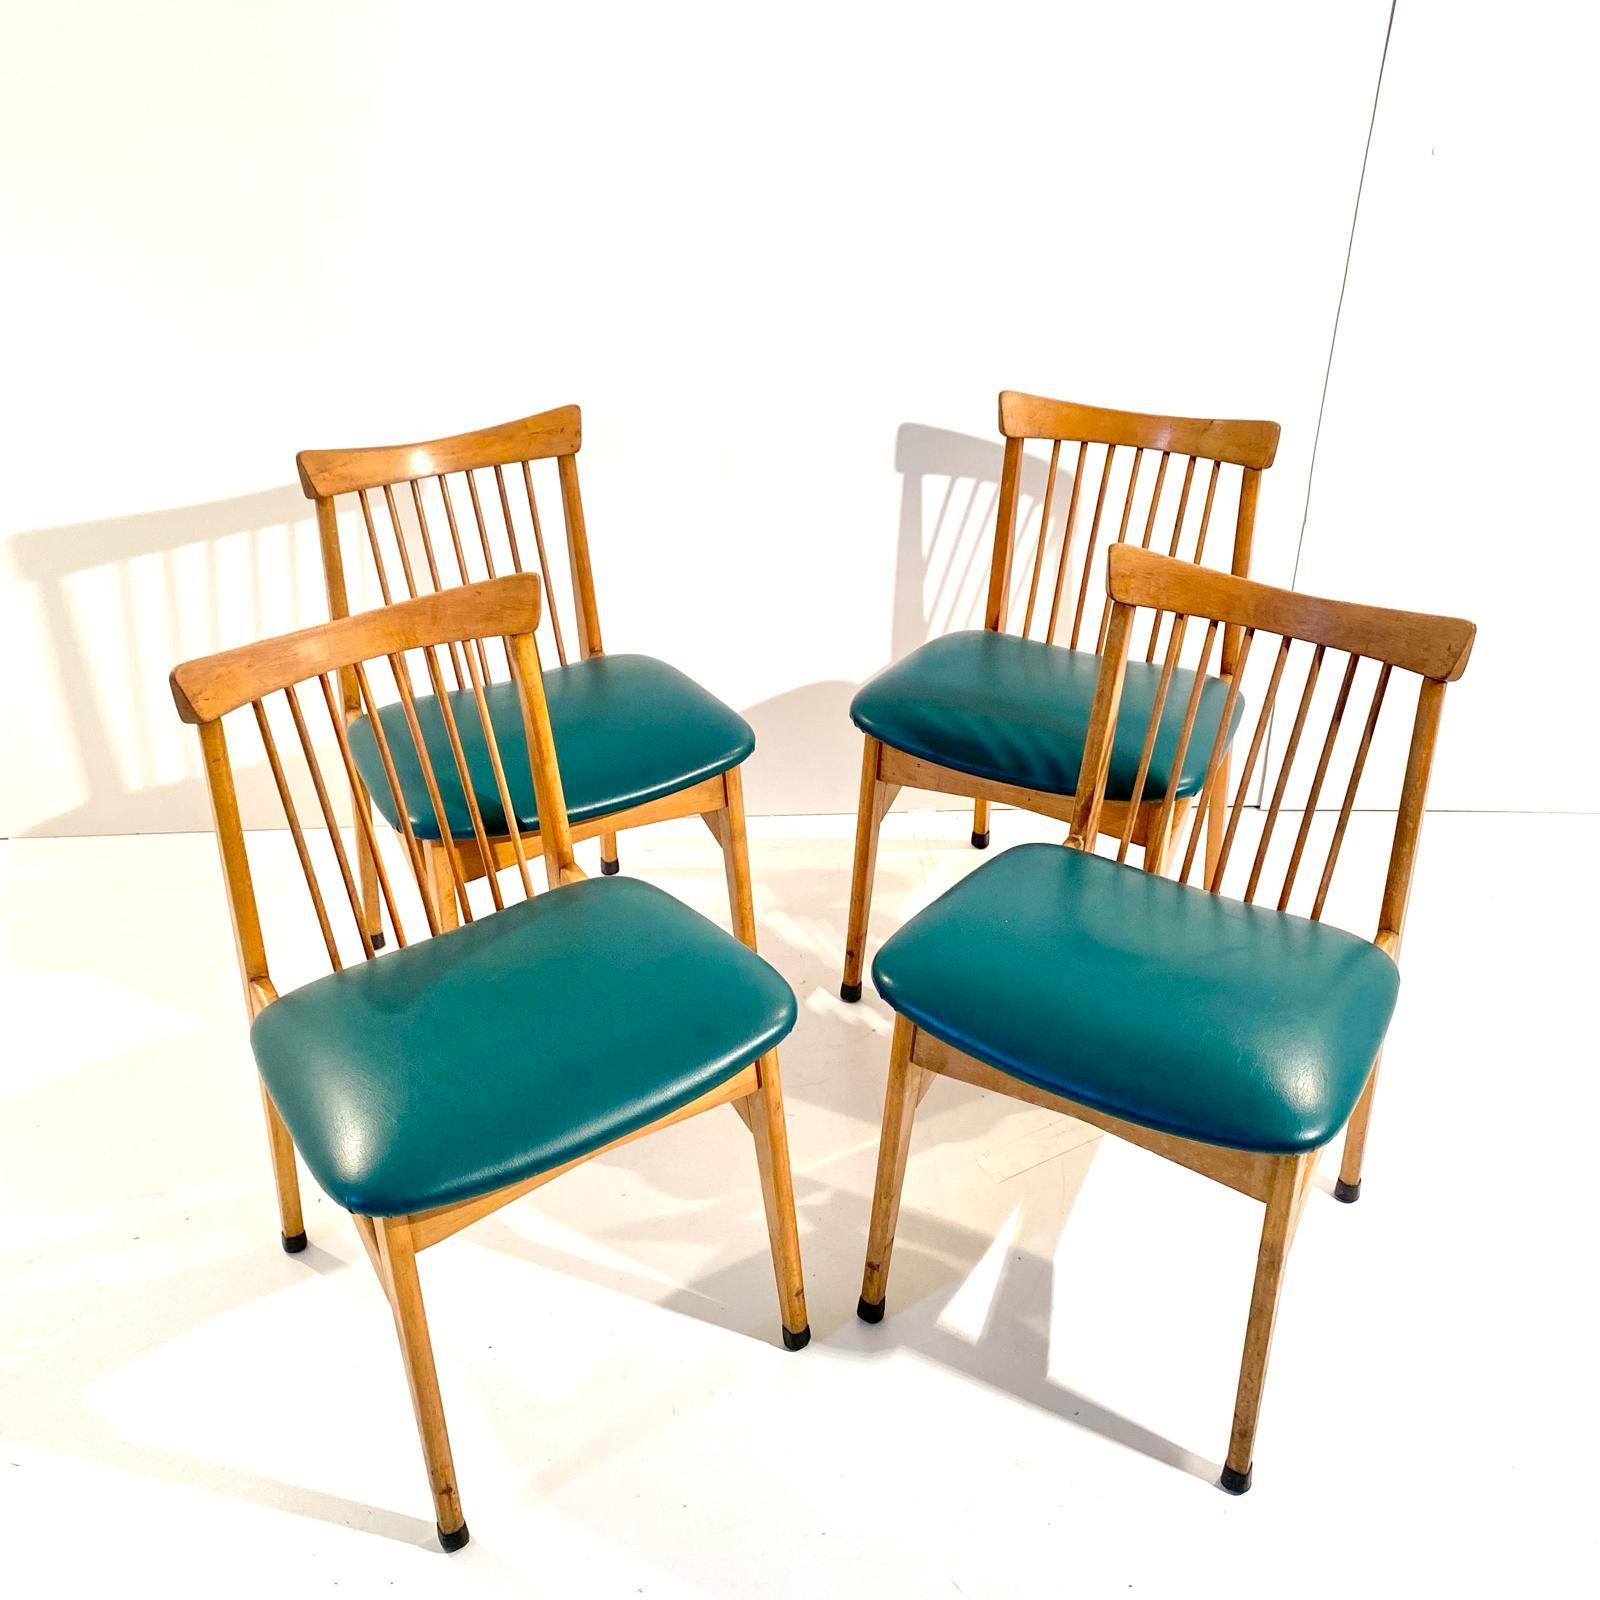 Mid-20th Century Midcentury modern wood dining chairs, Set of Four, Italy, 1960s For Sale